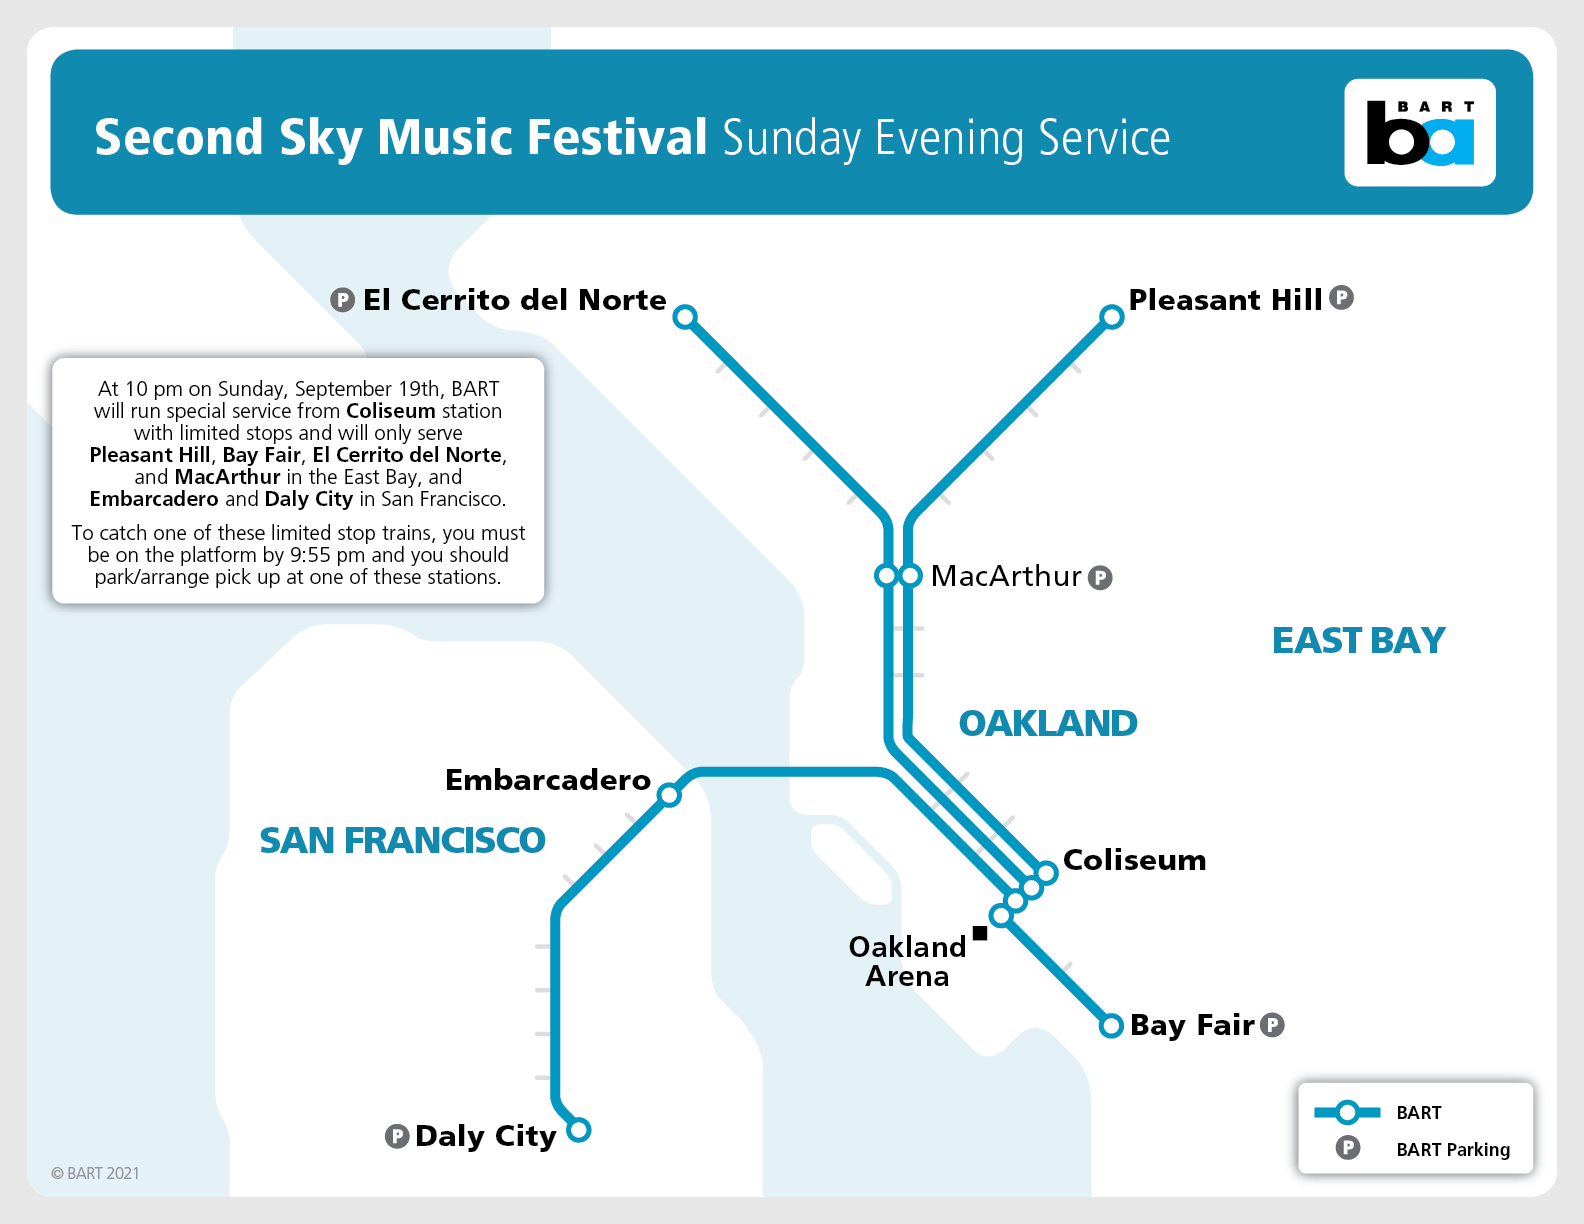 BART Second Sky Music Festival Sunday Service Map Accessible PDF is available on this page